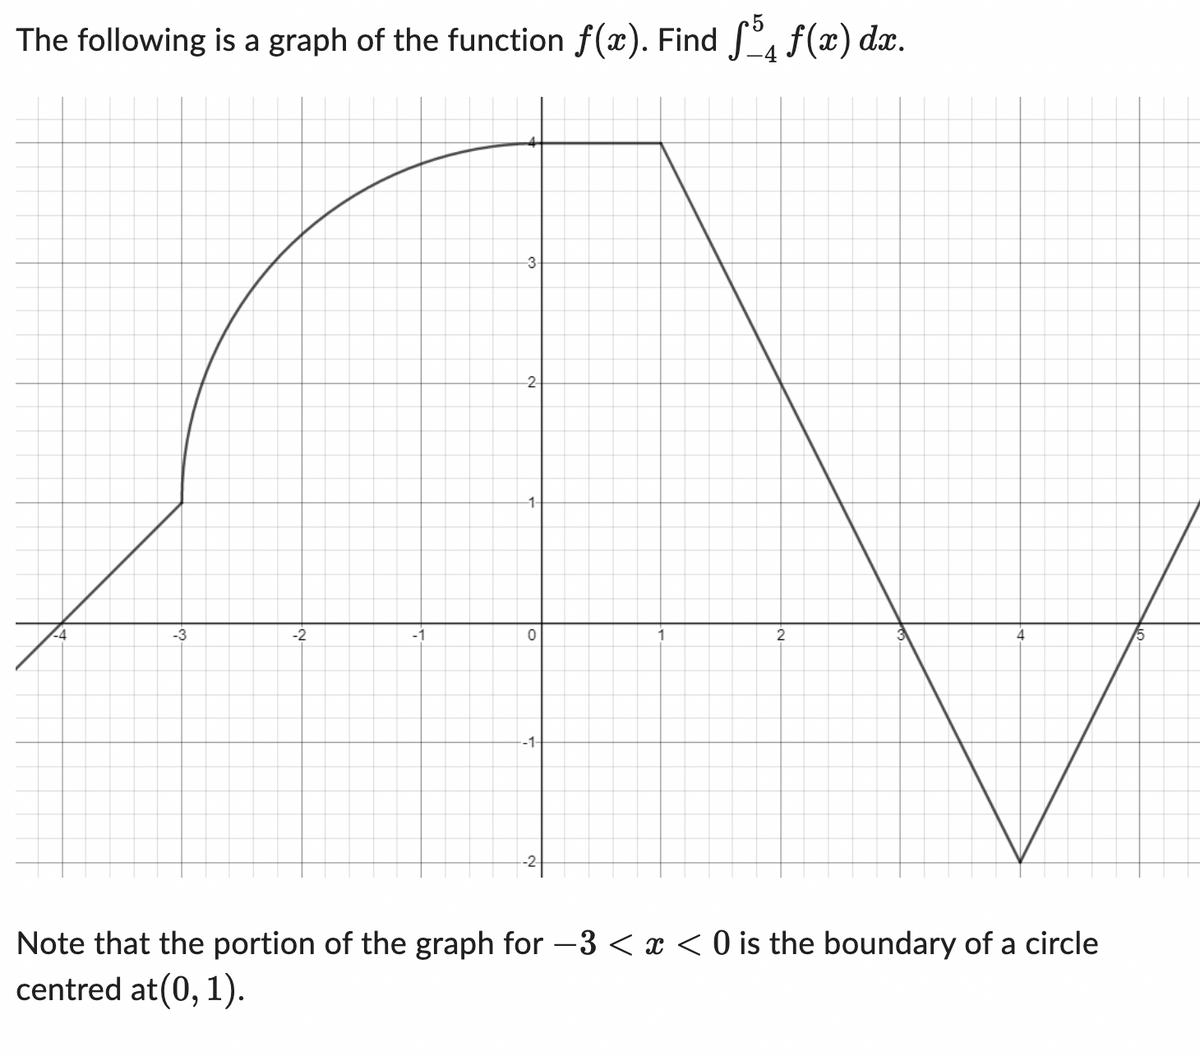 The following is a graph of the function f(x). Find ƒ ƒ(x) dx.
4
-3
-2
-3-
-2
0
-1-
2
4
Note that the portion of the graph for -3 < x < 0 is the boundary of a circle
centred at(0, 1).